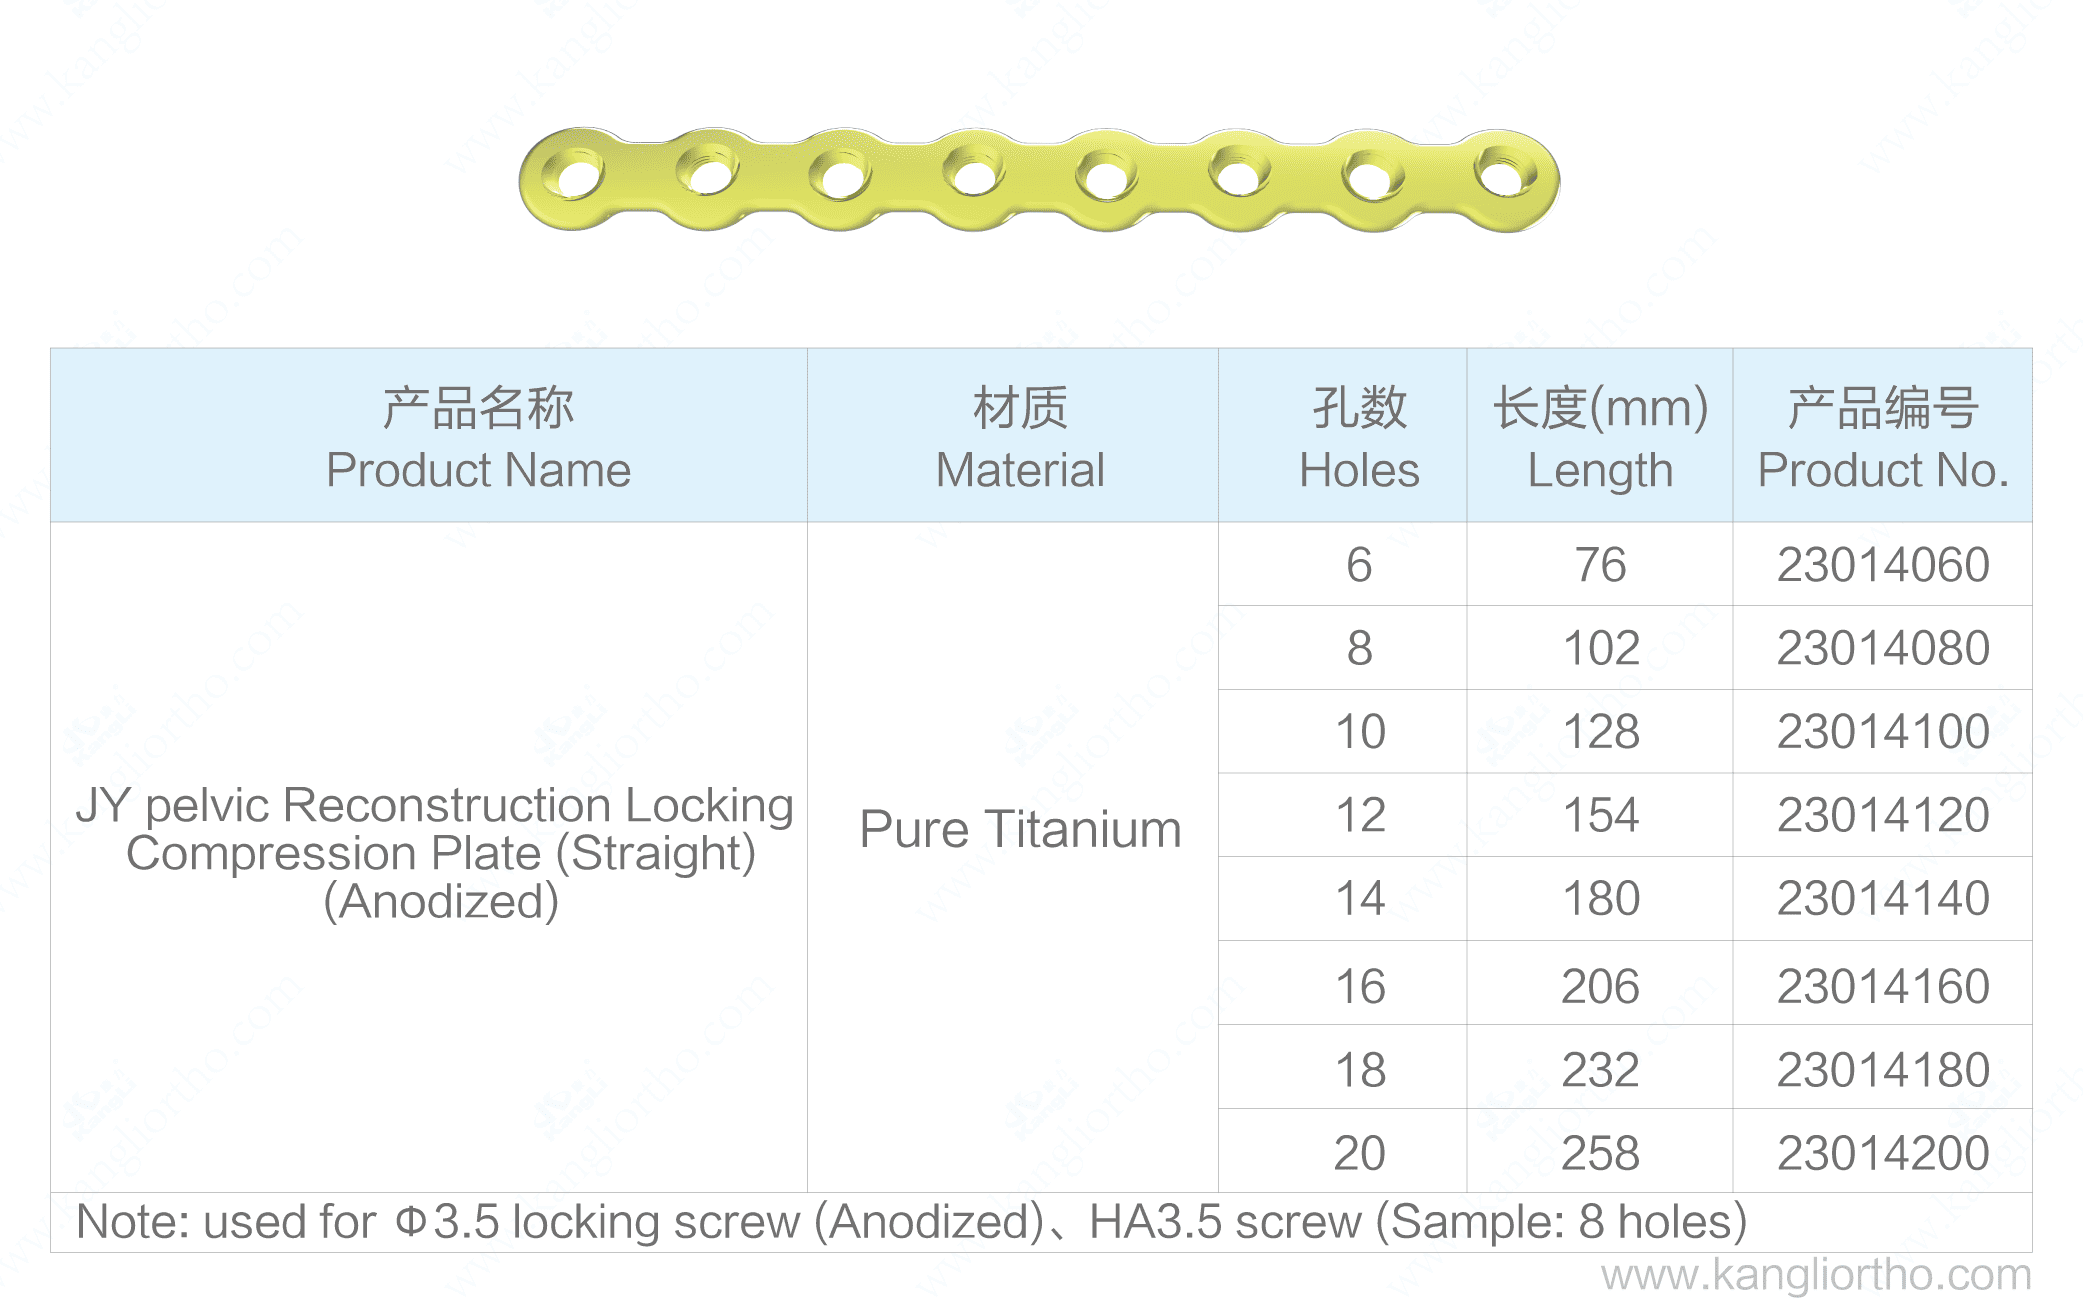 jy-pelvic-reconstruction-locking-compression-plate-straight-anodized-specifications